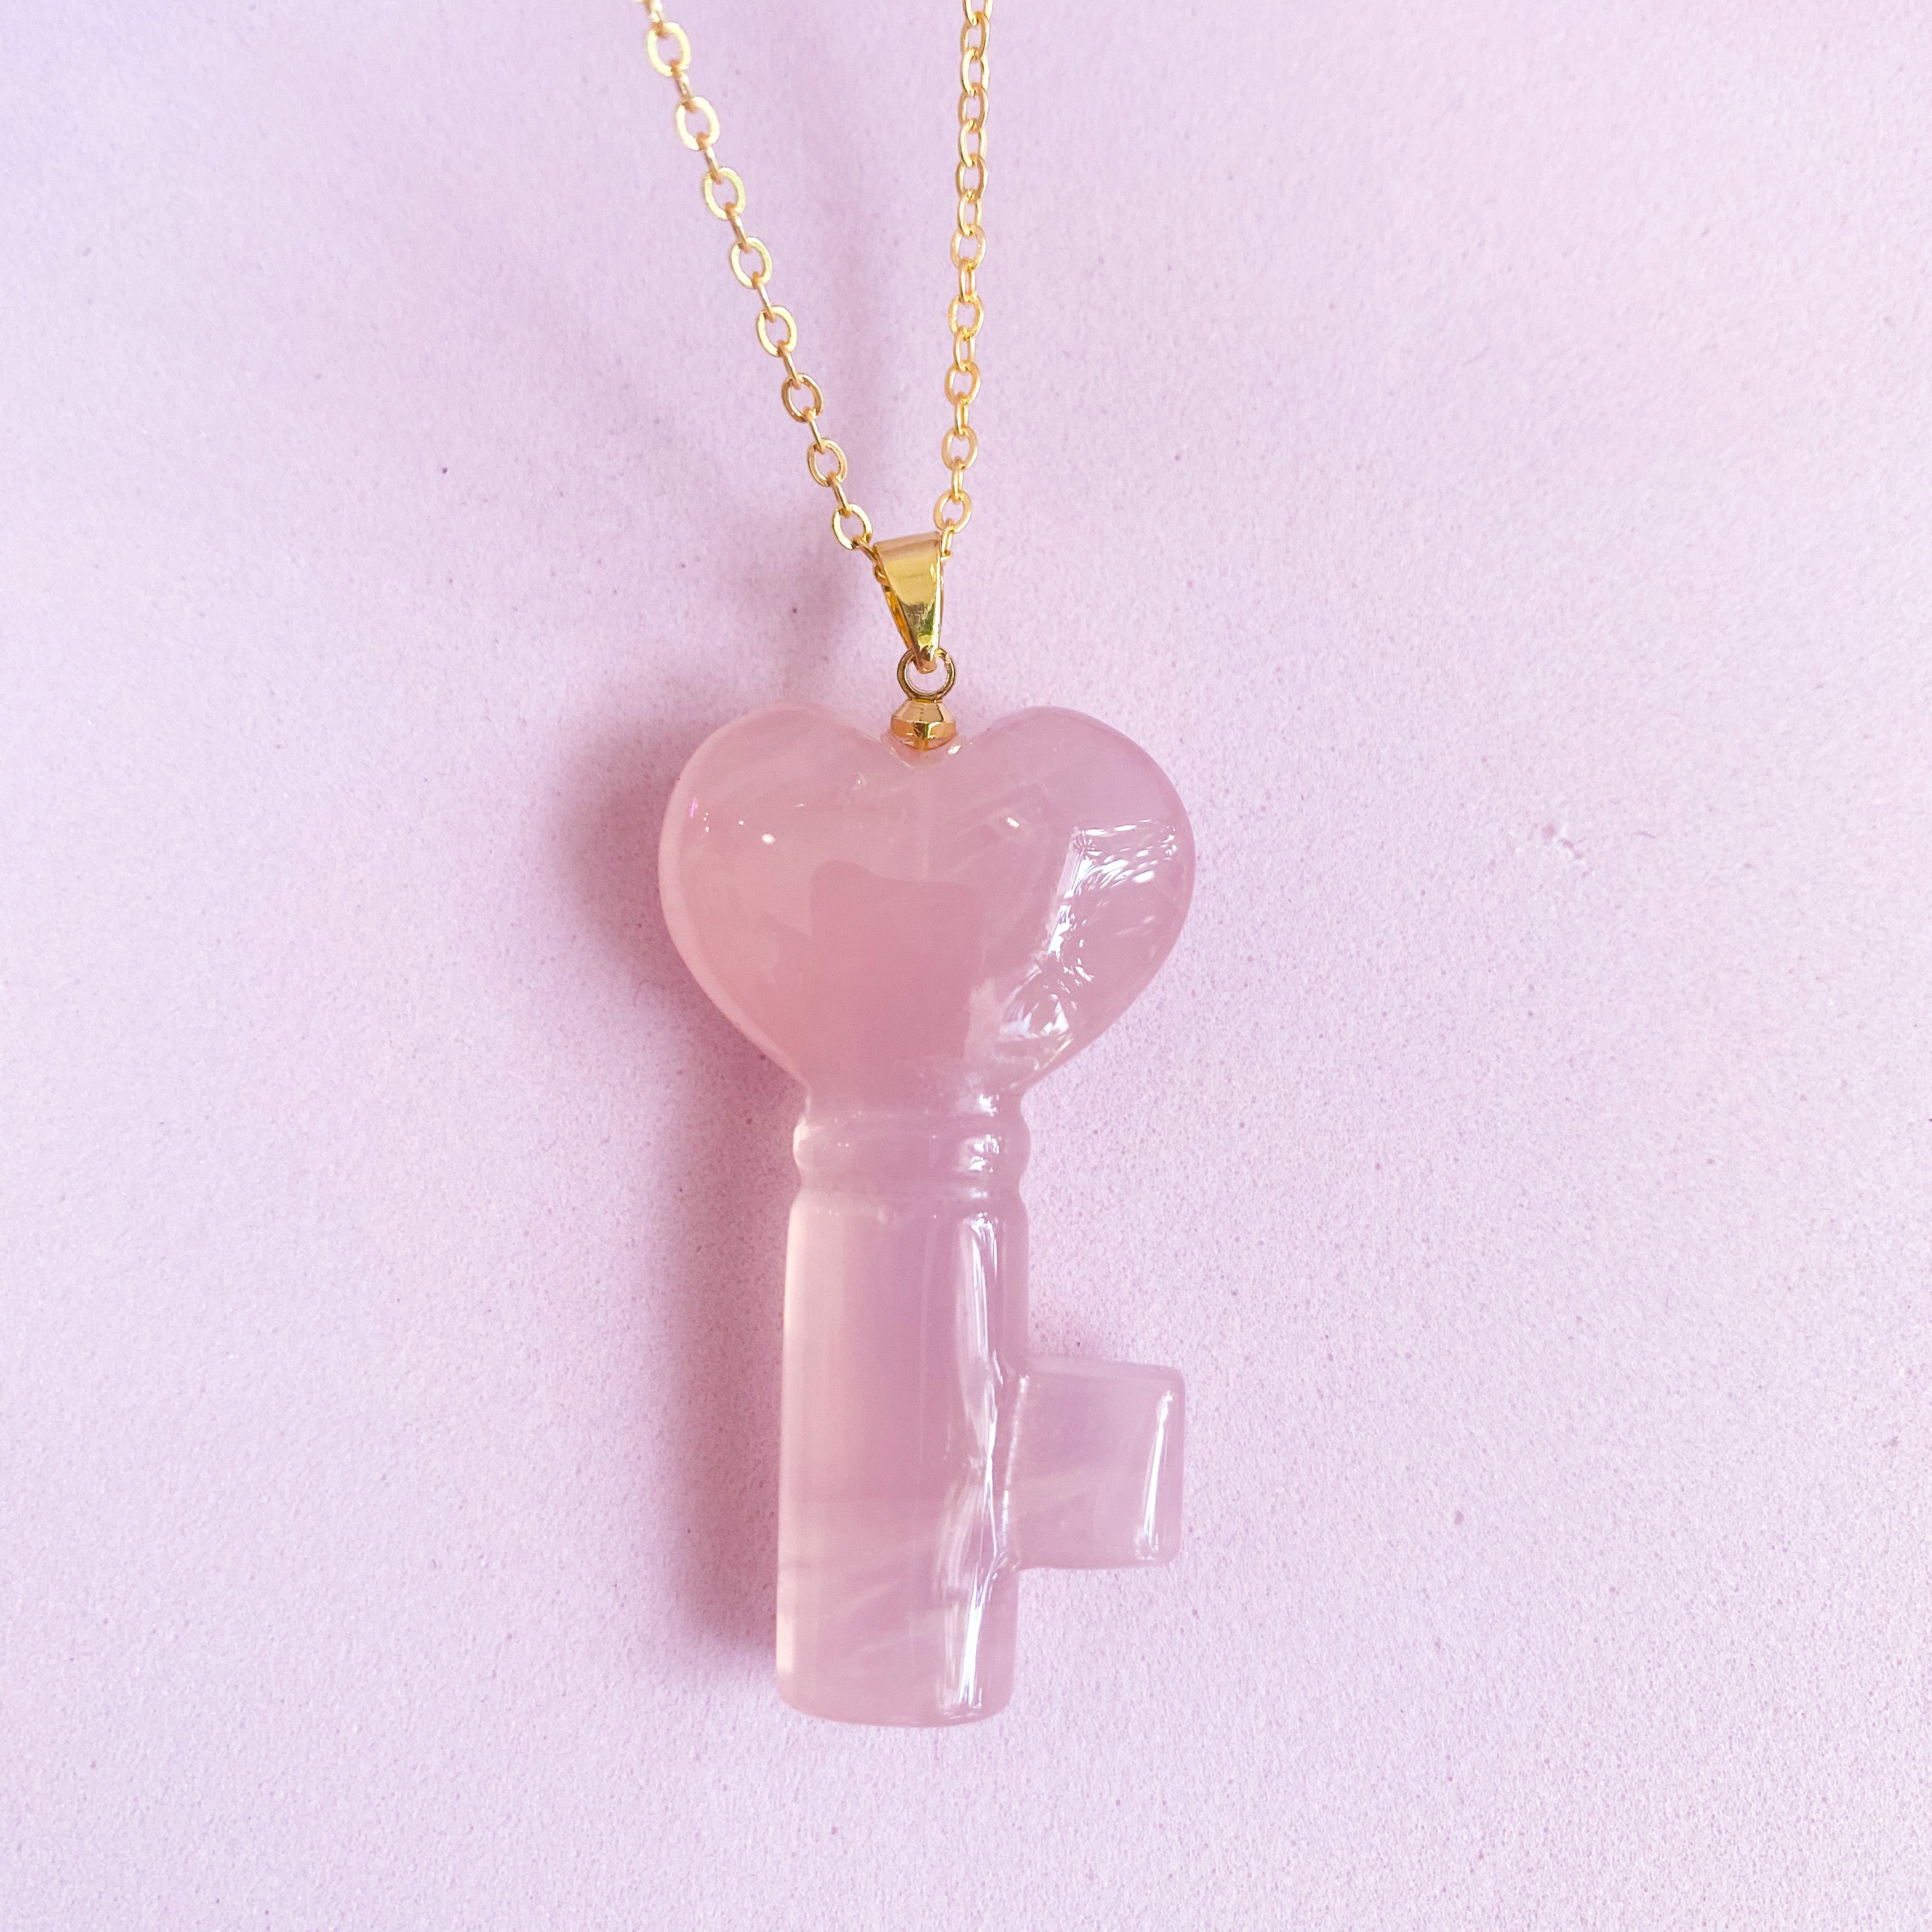 Rose Quartz Crystal Key Necklace with gold chain